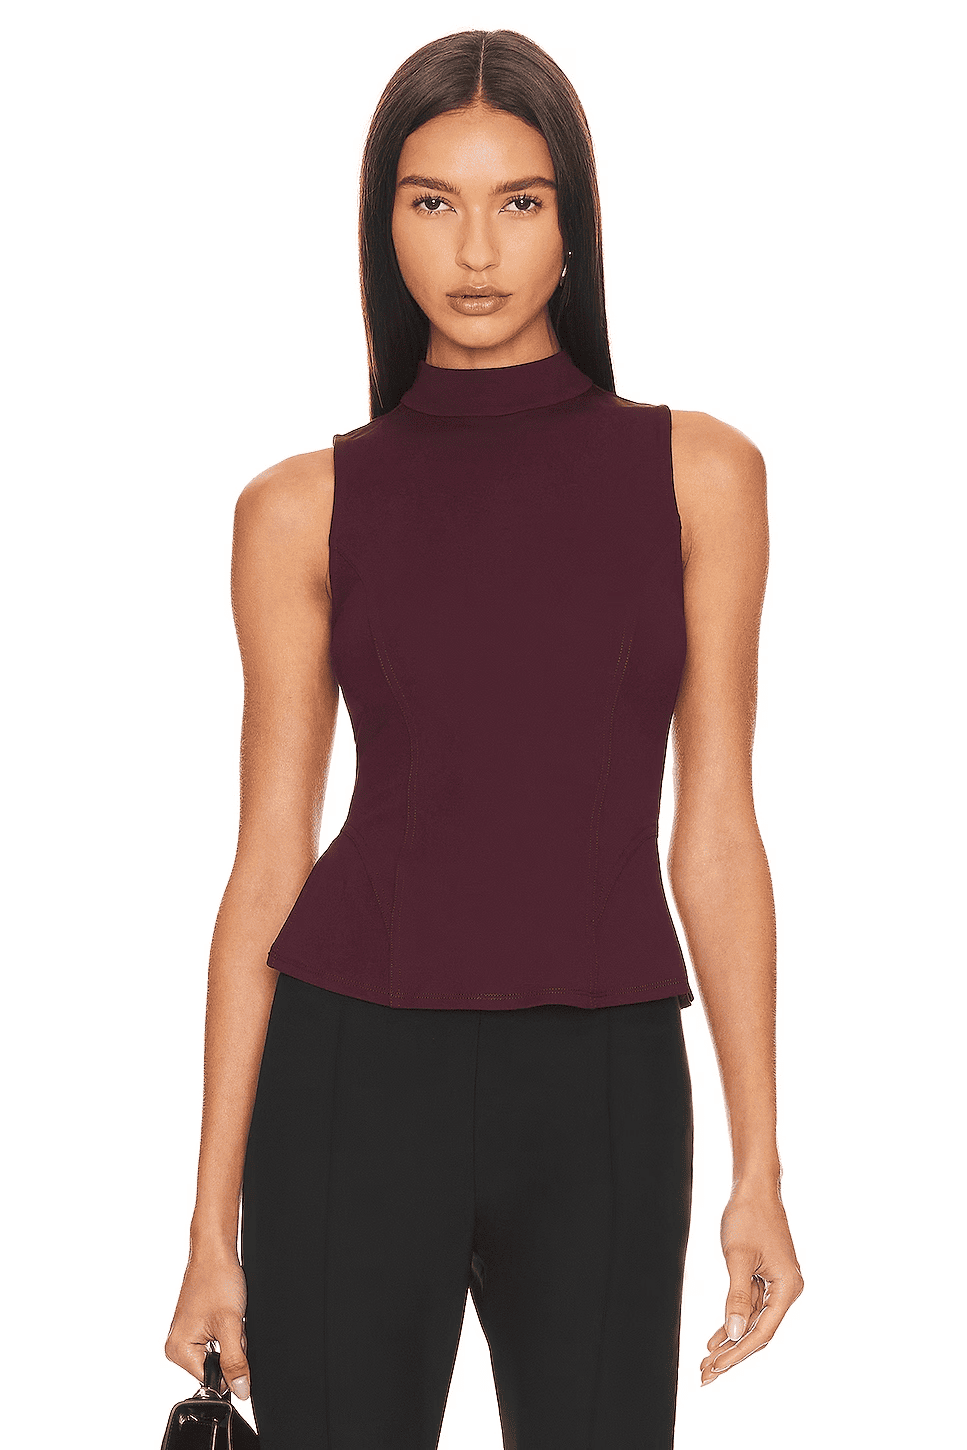 Burgundy Sleeveless Top | Warm Color Palette Clothes